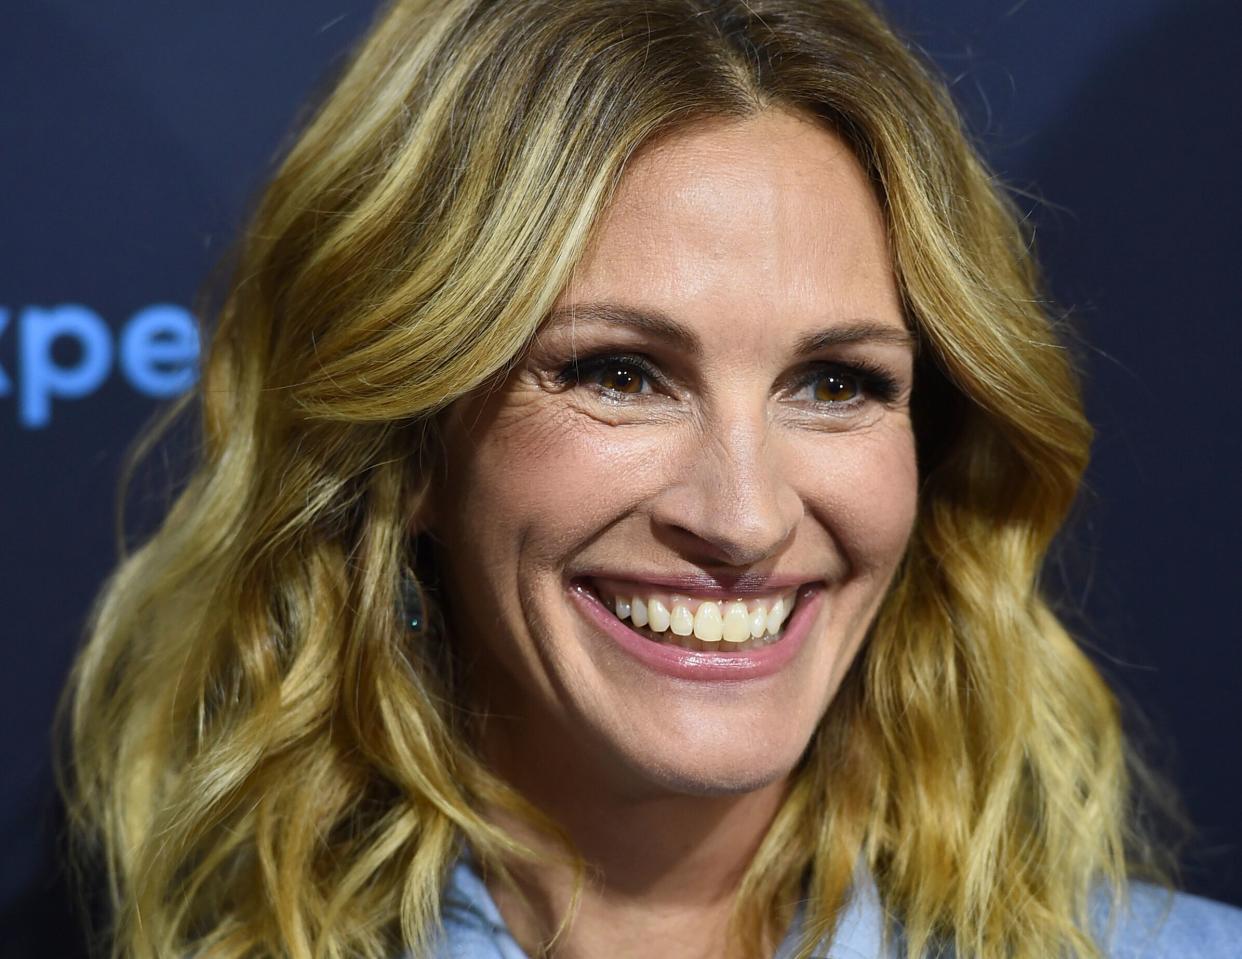 Julia Roberts says that "Game of Thrones" is "for sure" not for her. (Photo: Jordan Strauss/Invision/AP)